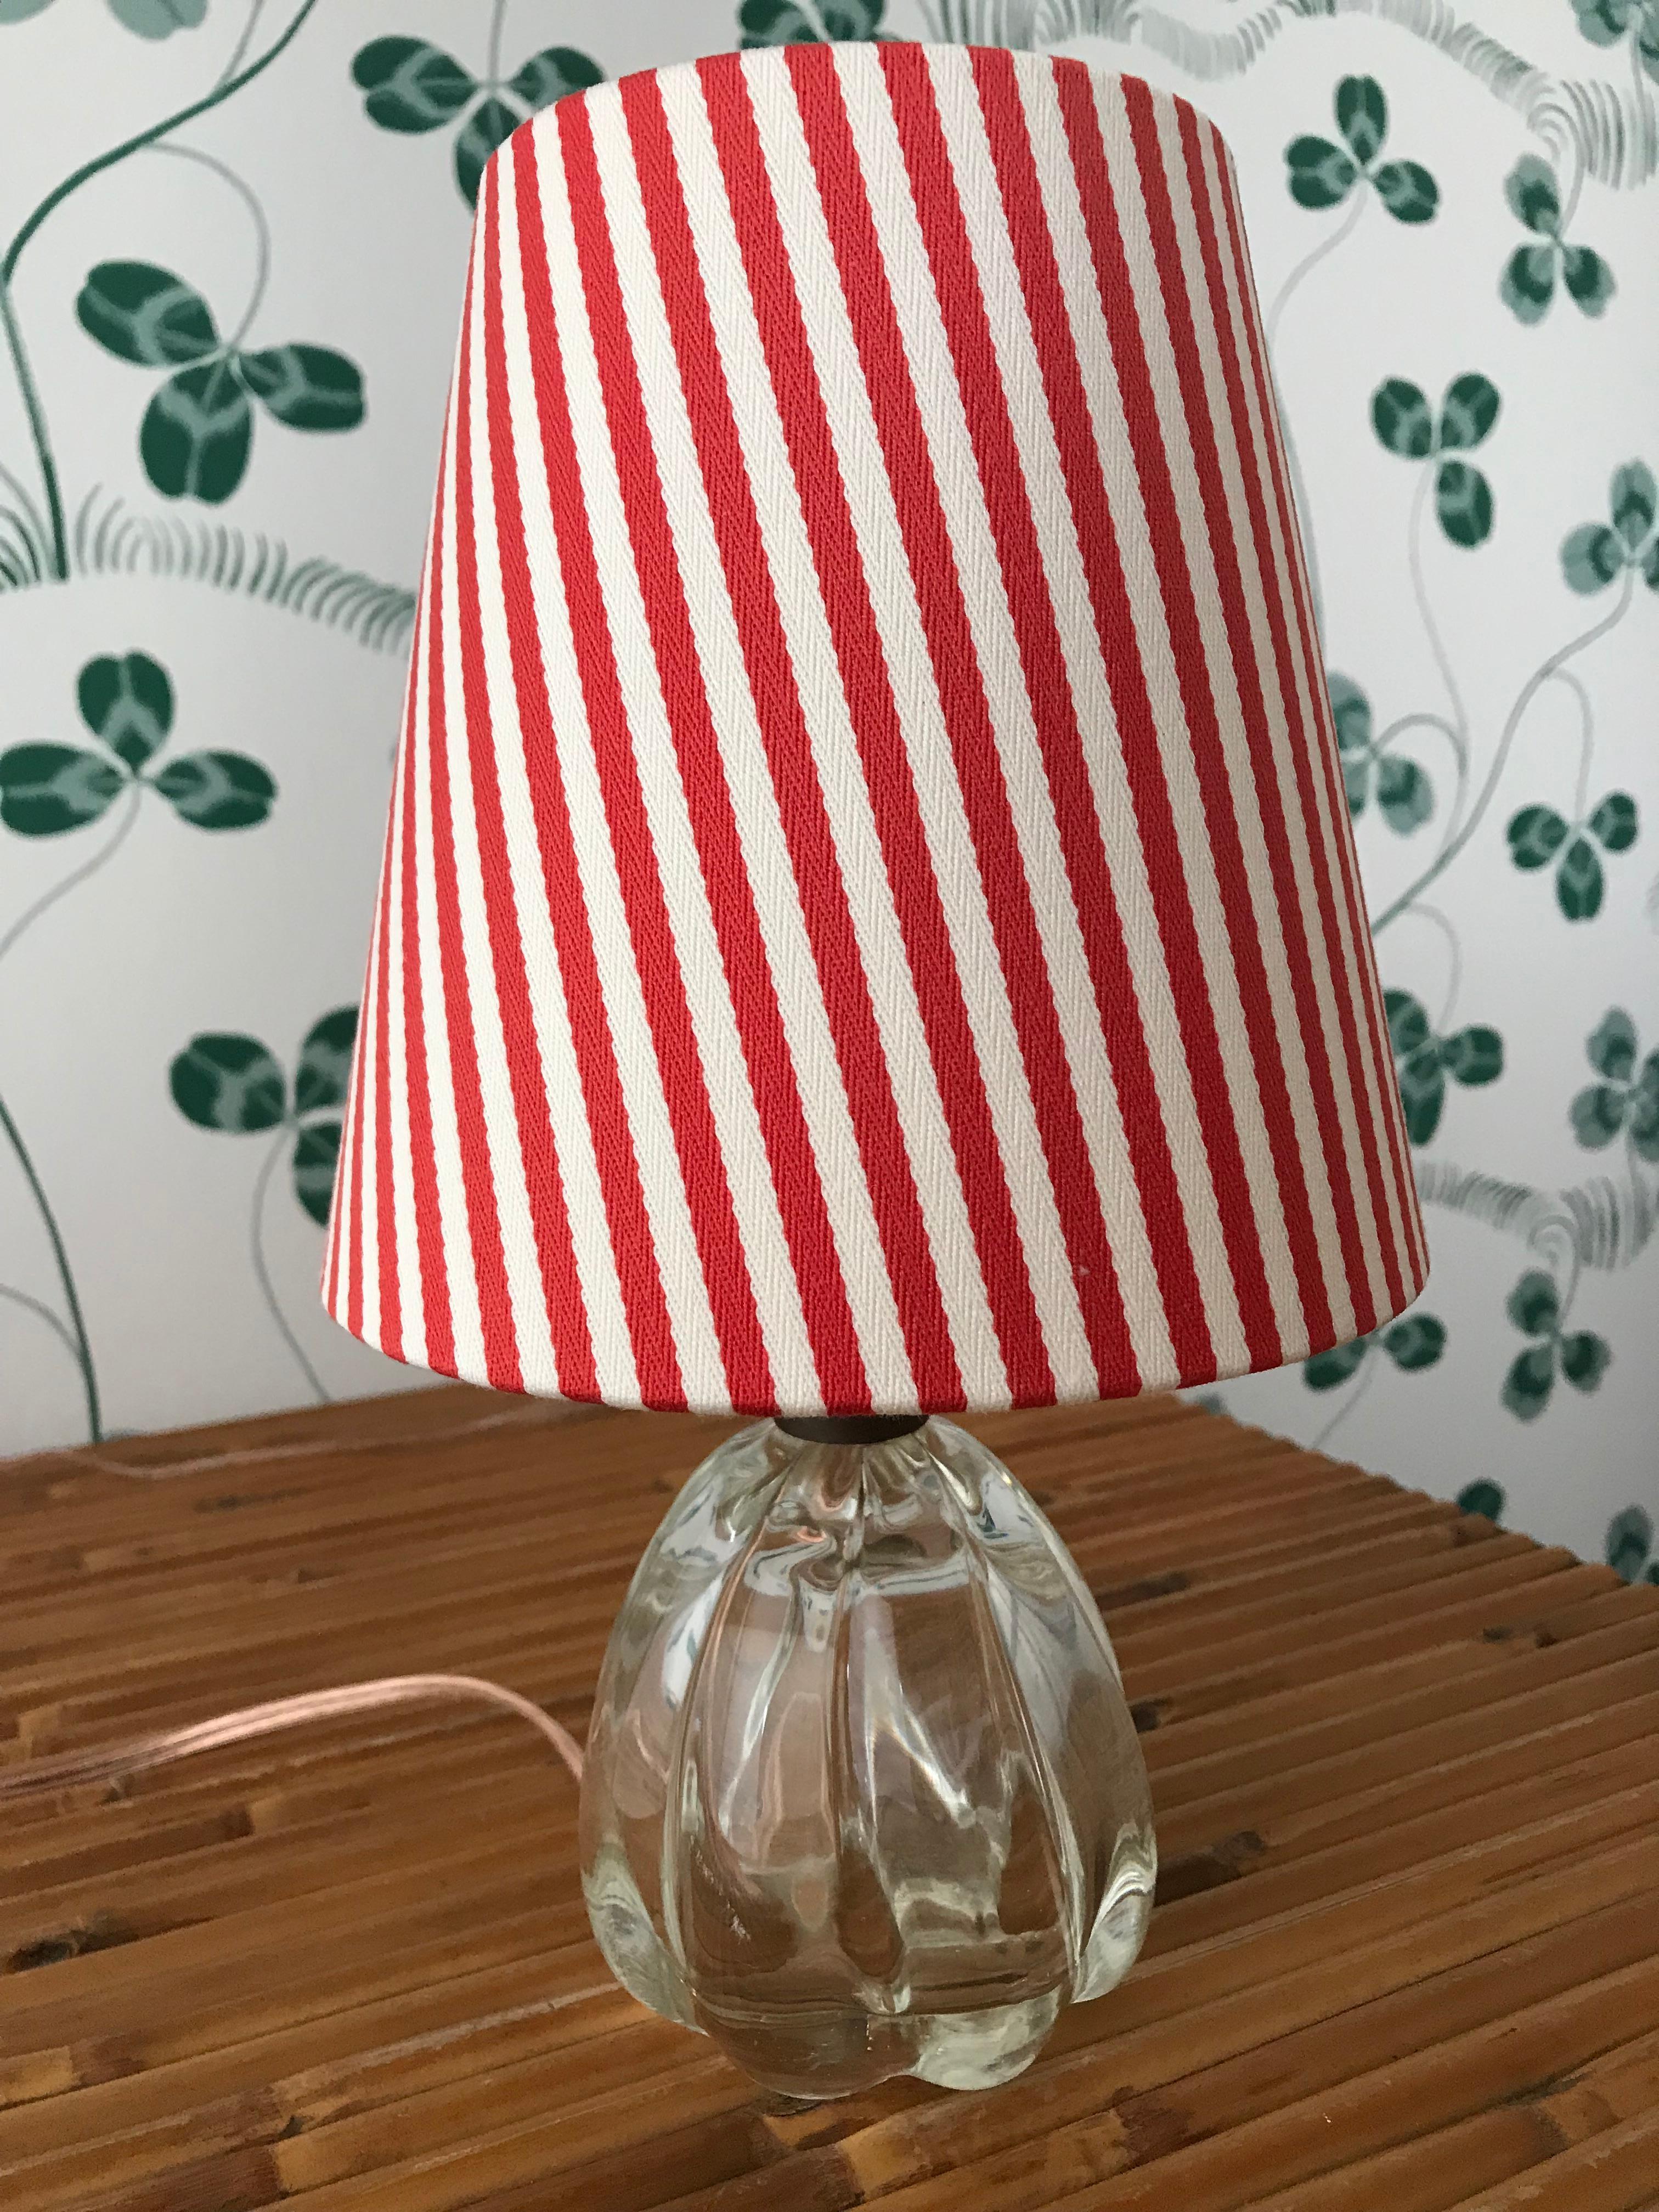 vintage table lamps 1940s